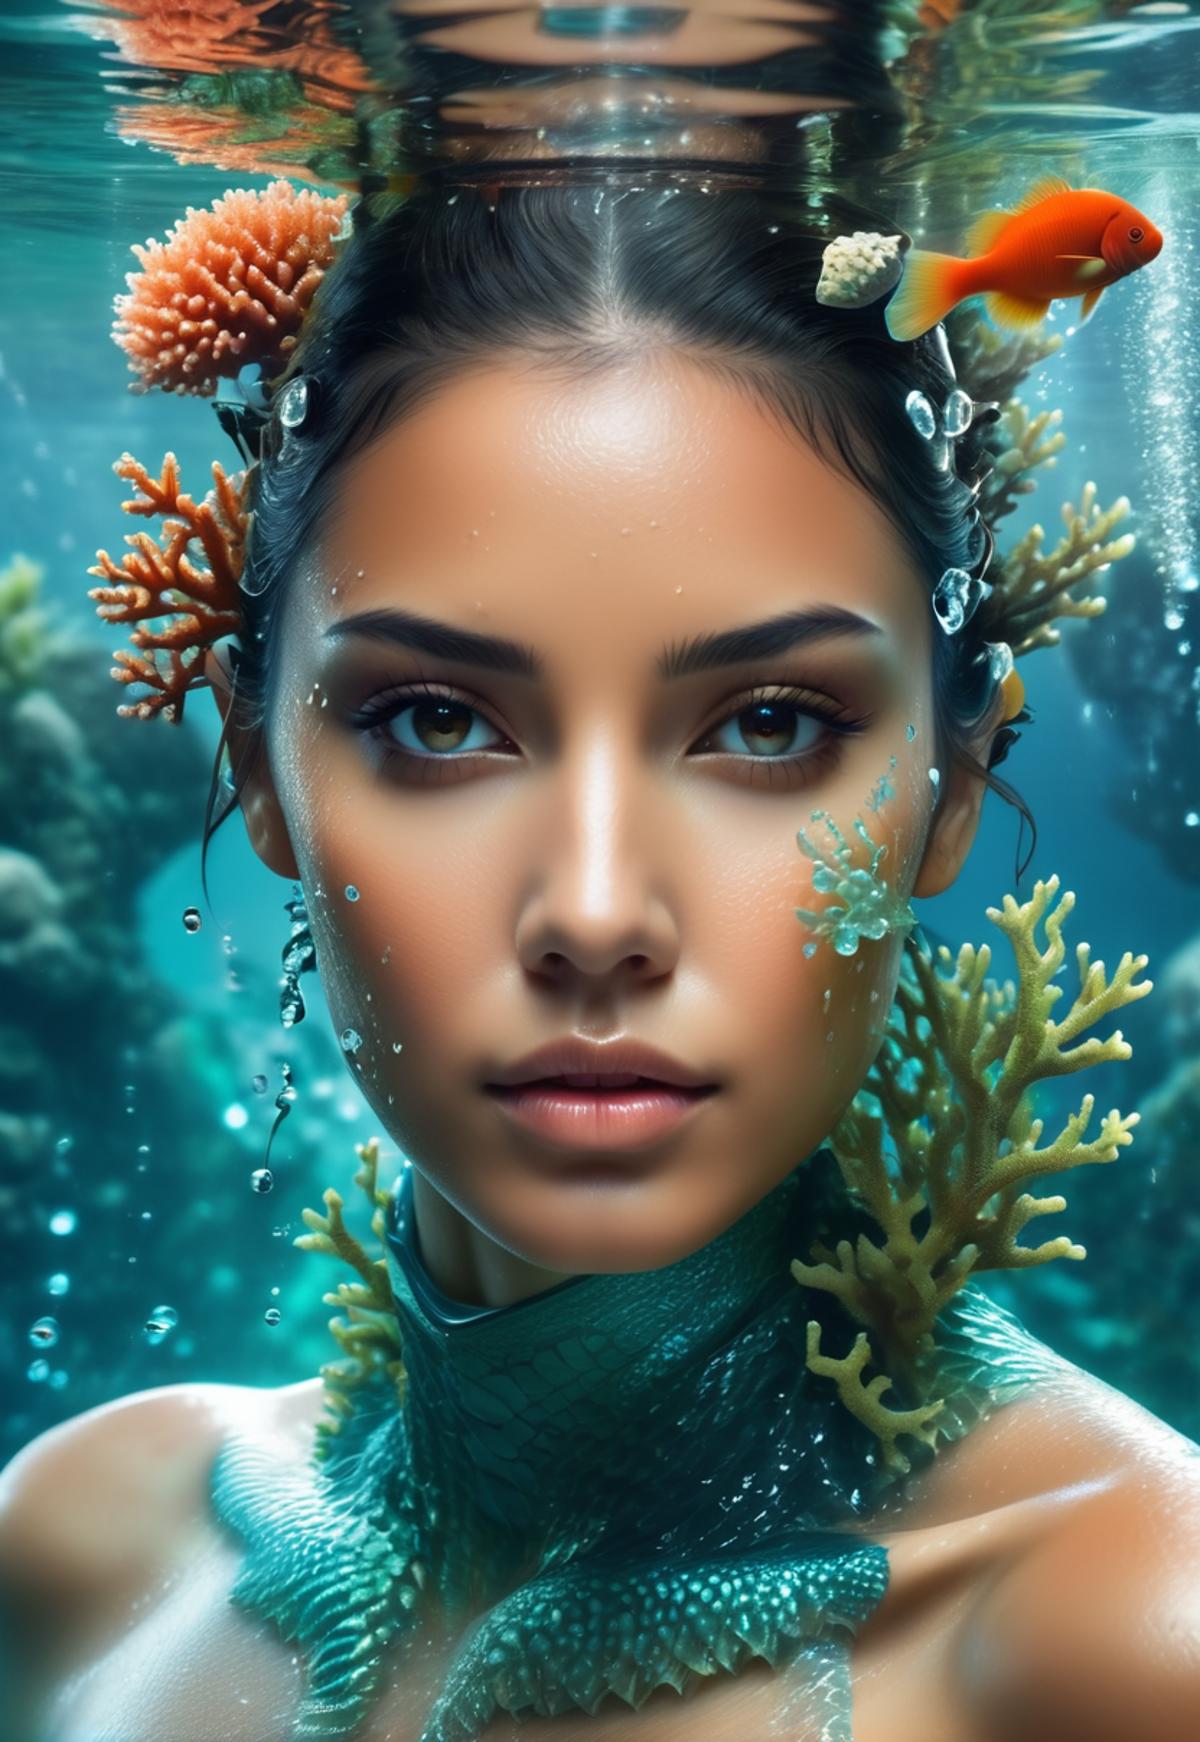 Woman with Blue Eyes and Coral Reef Makeup, Inspired by Mermaid Art